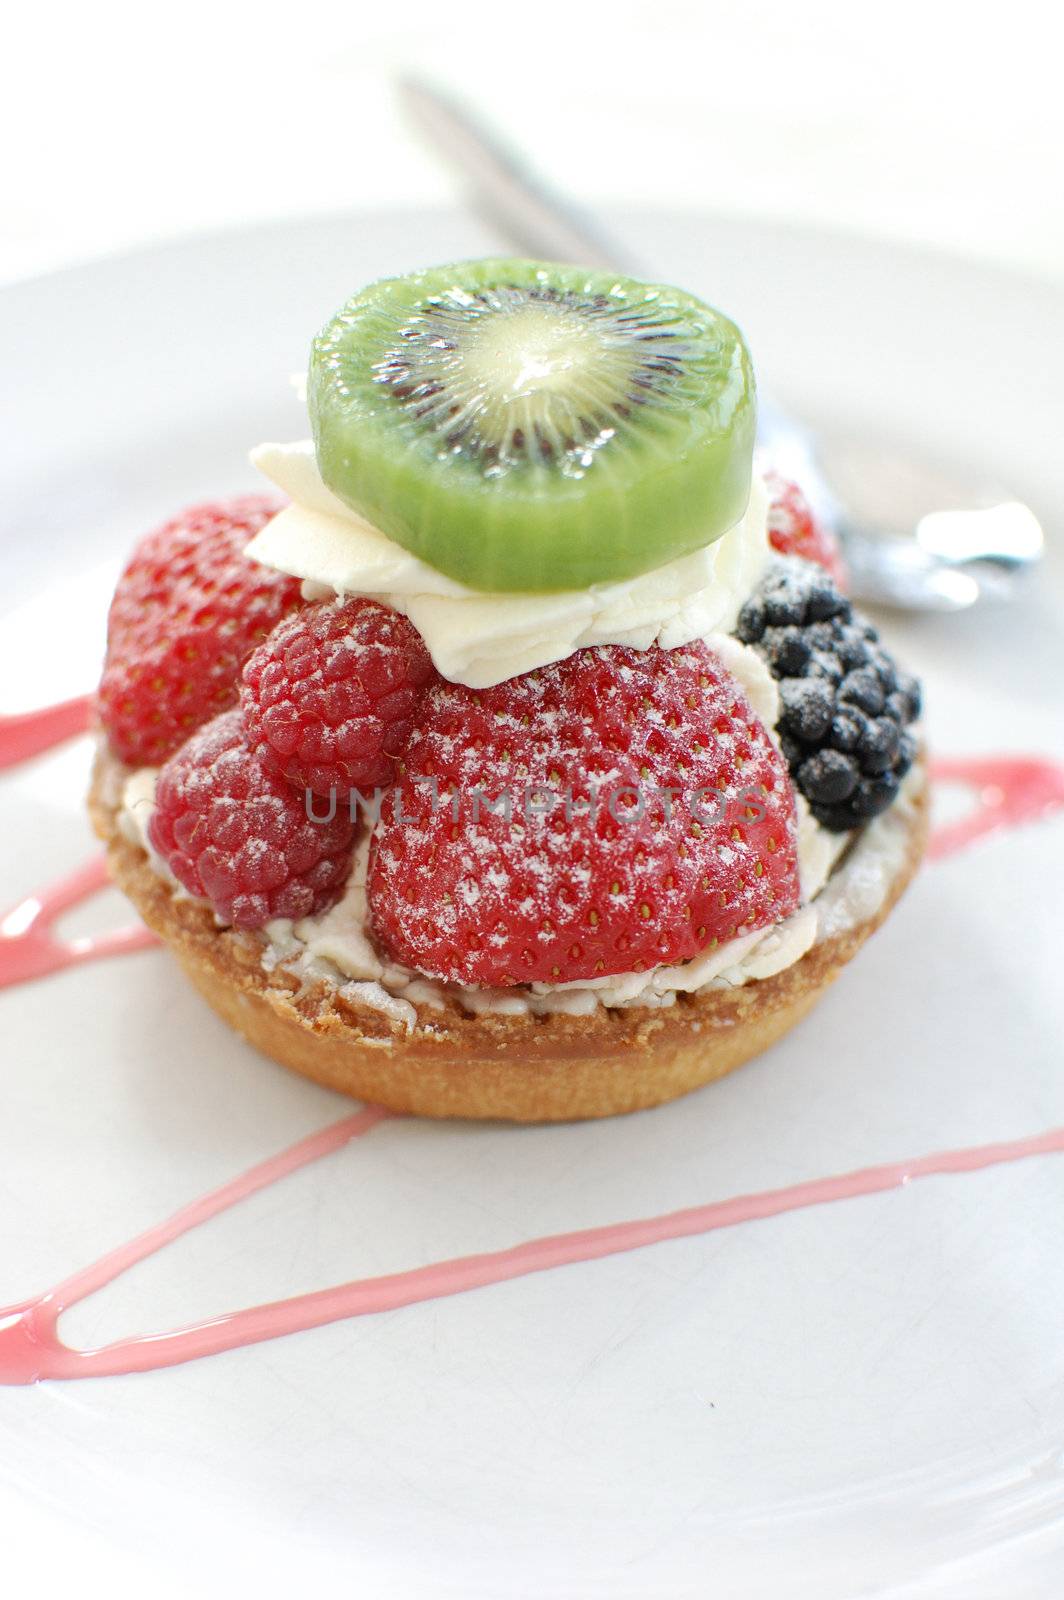 Cream filled tart with berries and kiwi fruit